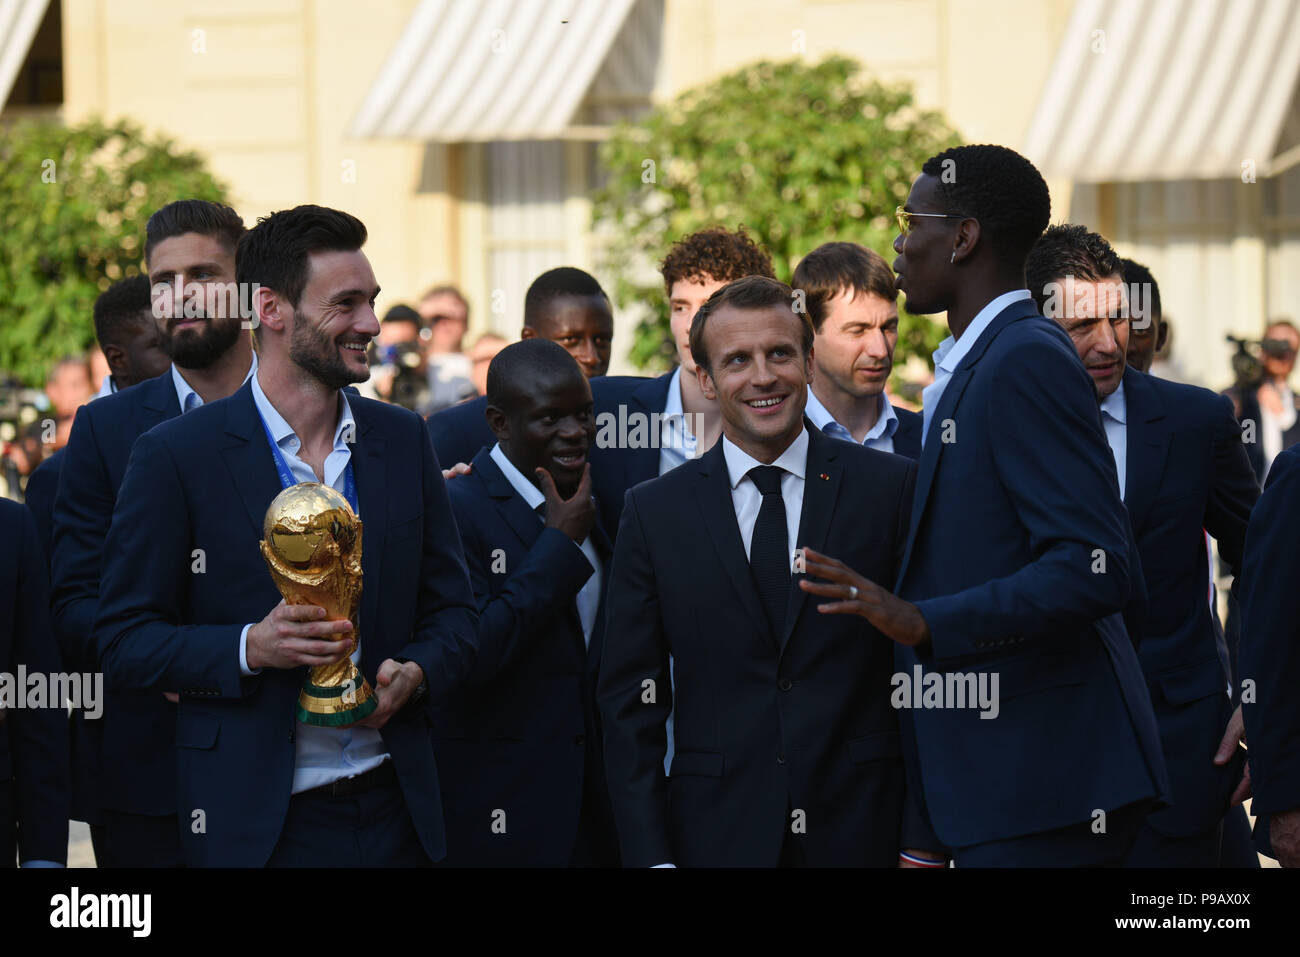 Paris, France. 16th July 2018. French President Emmanuel Macron welcomes  the French football team at the presidential Elysee palace in the wake of  France's World Cup victory. Le president francais Emmanuel Macron